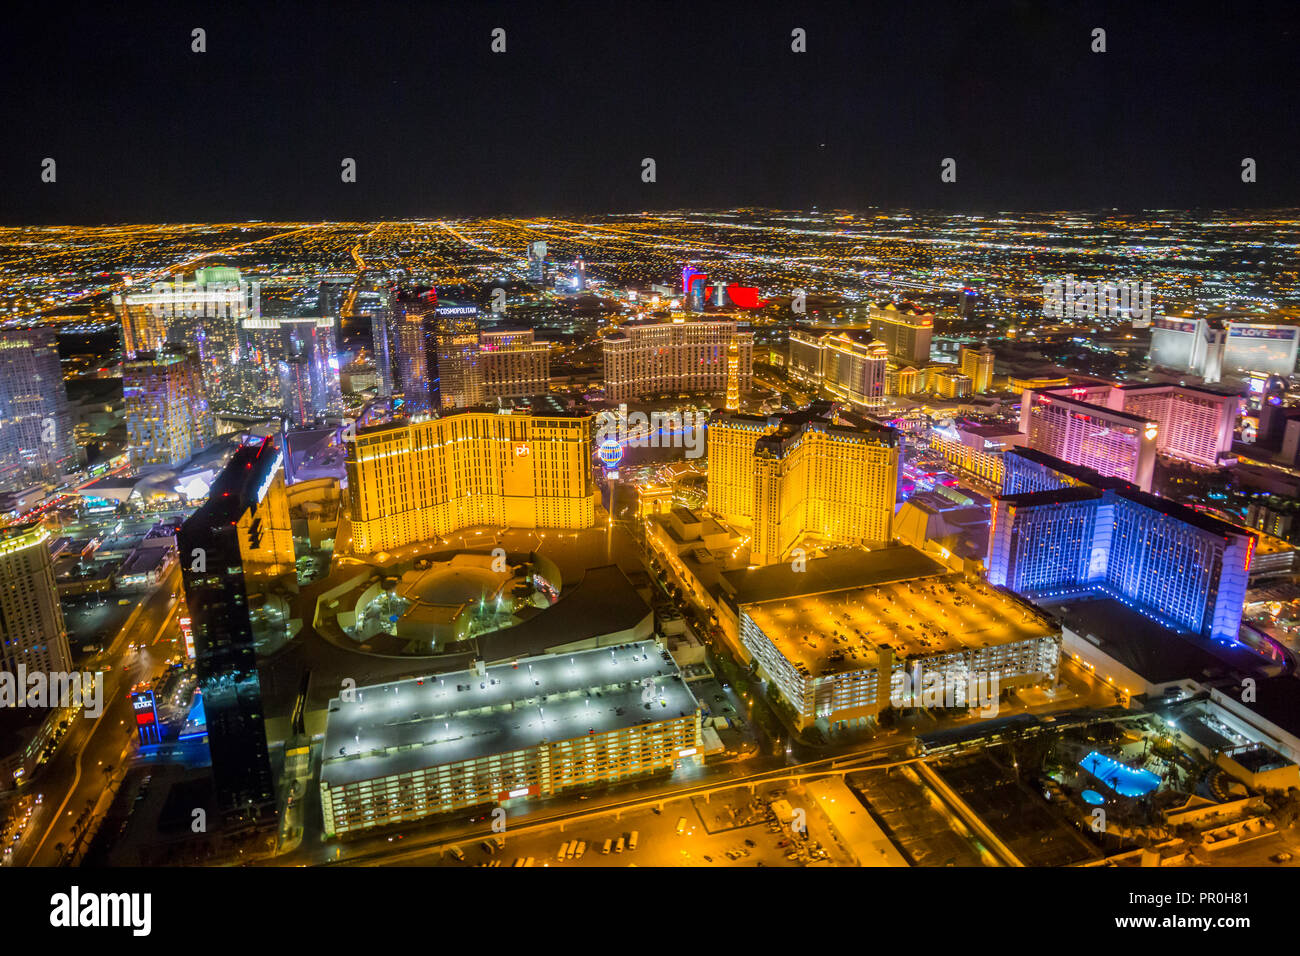 View of Las Vegas and The Strip from helicopter at night, Las Vegas, Nevada, United States of America, North America Stock Photo